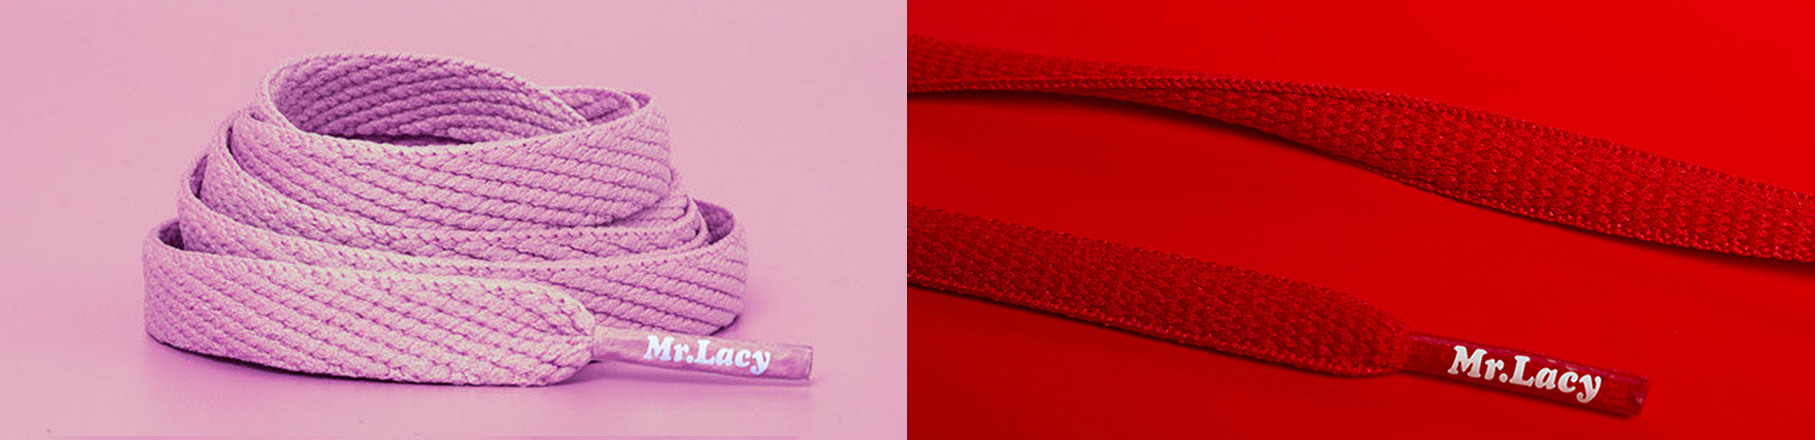 Mr.Lacy - The Hottest Shoelaces Available